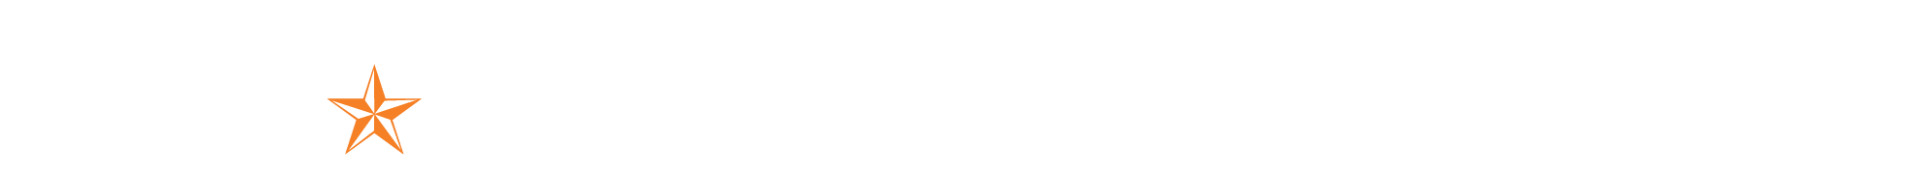 U T A College of Nursing and Health Innovation, Center for Rural Health and Nursing logo